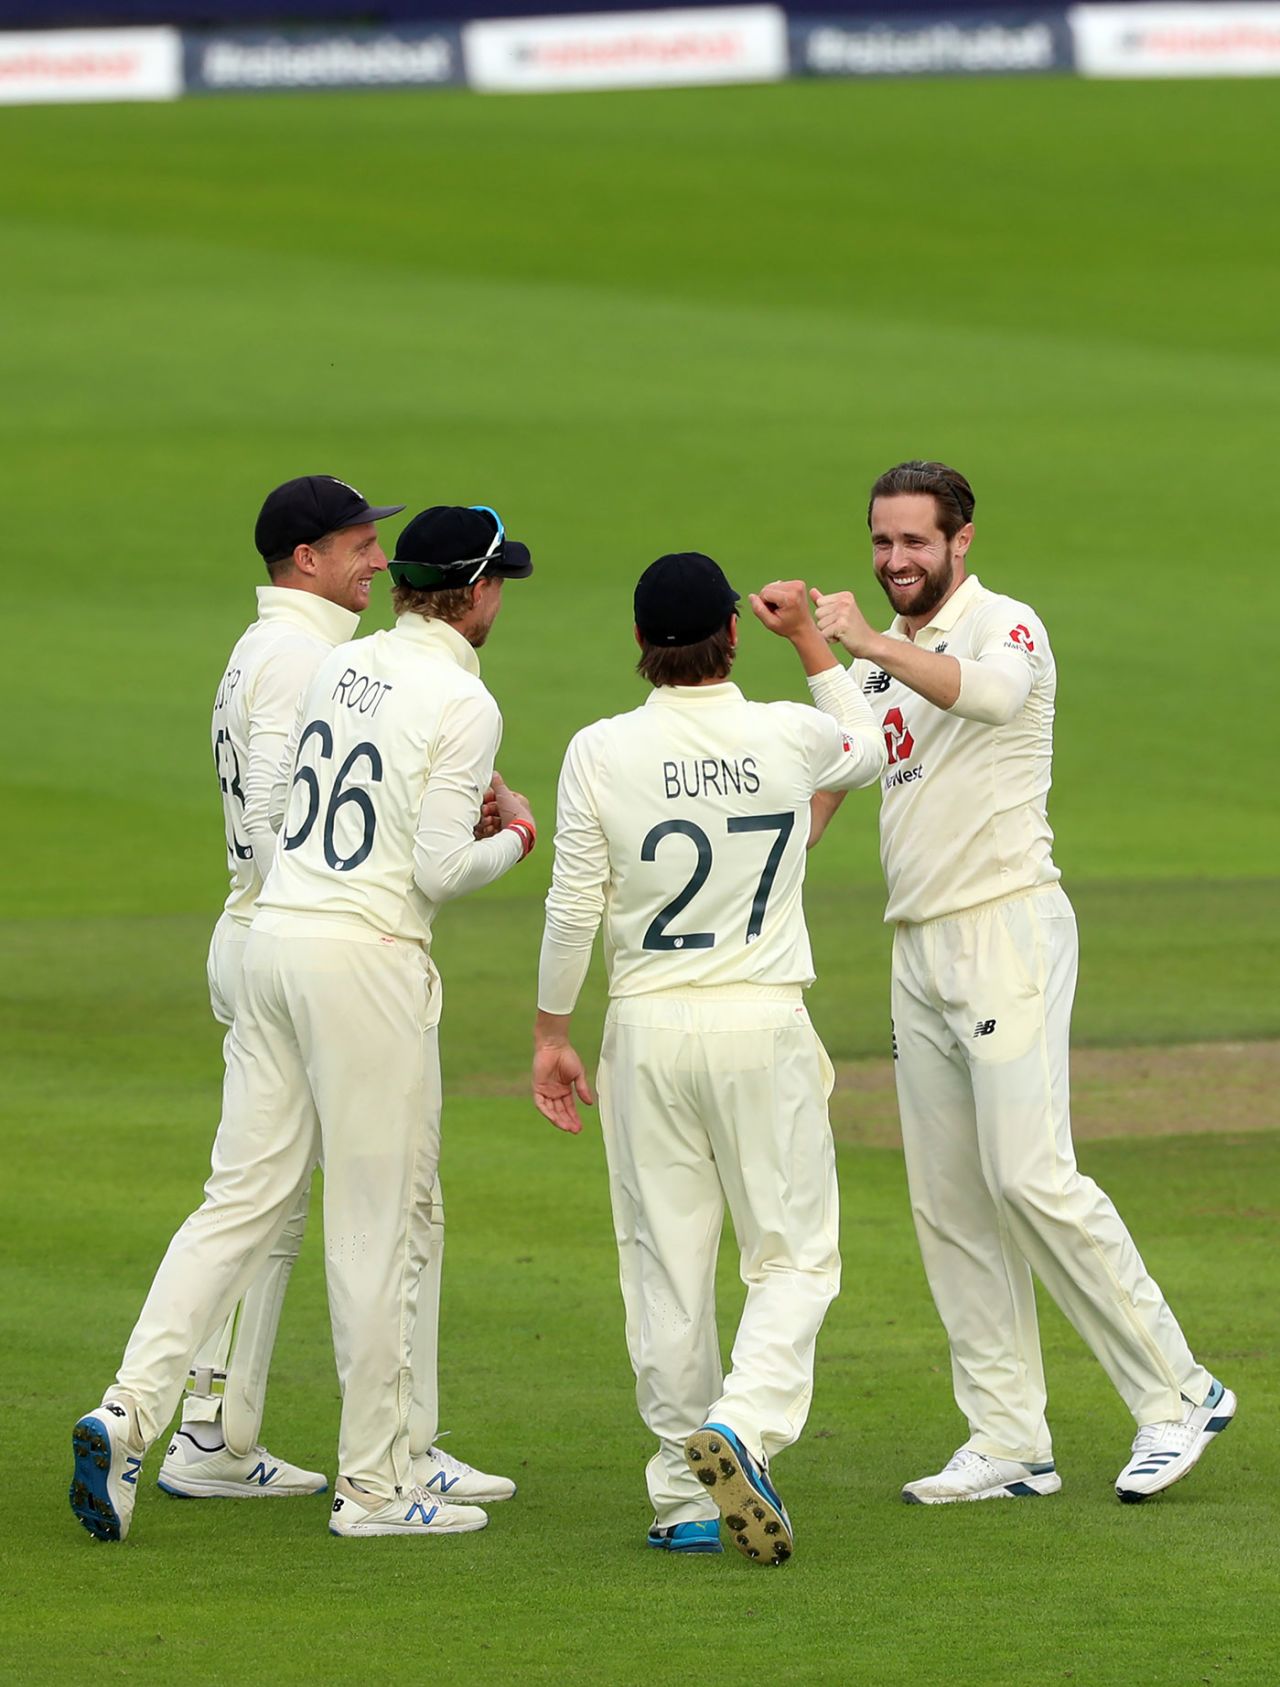 Chris Woakes struck again to remove Azhar Ali, England v Pakistan, 1st Test, Old Trafford, 3rd day, August 7, 2020